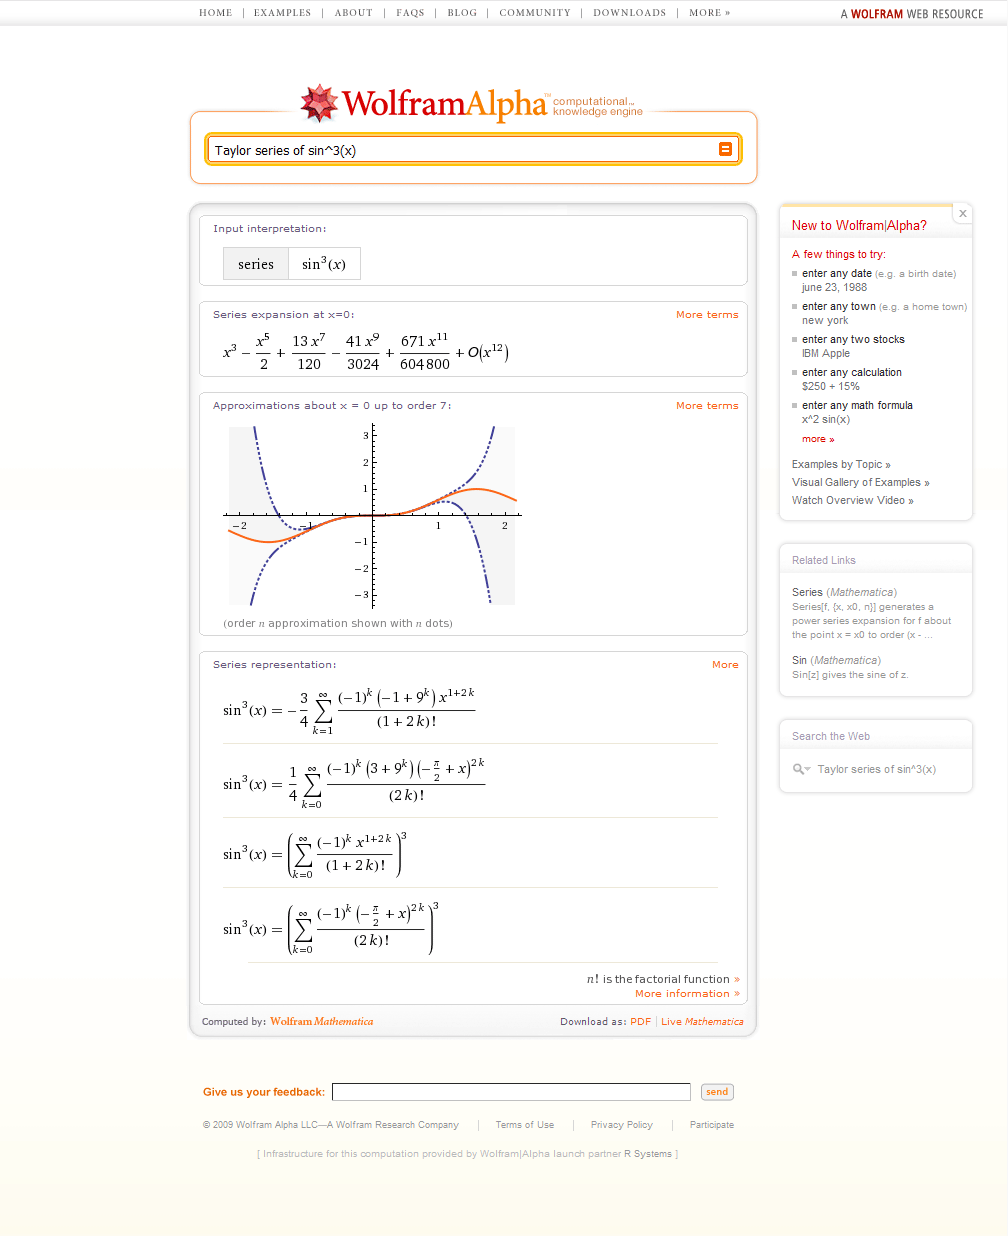 Screenshot of Wolfram|Alpha query results for Taylor series of sin^3(x), as early as the 'knowledge' search engine launch, mid May 2009.